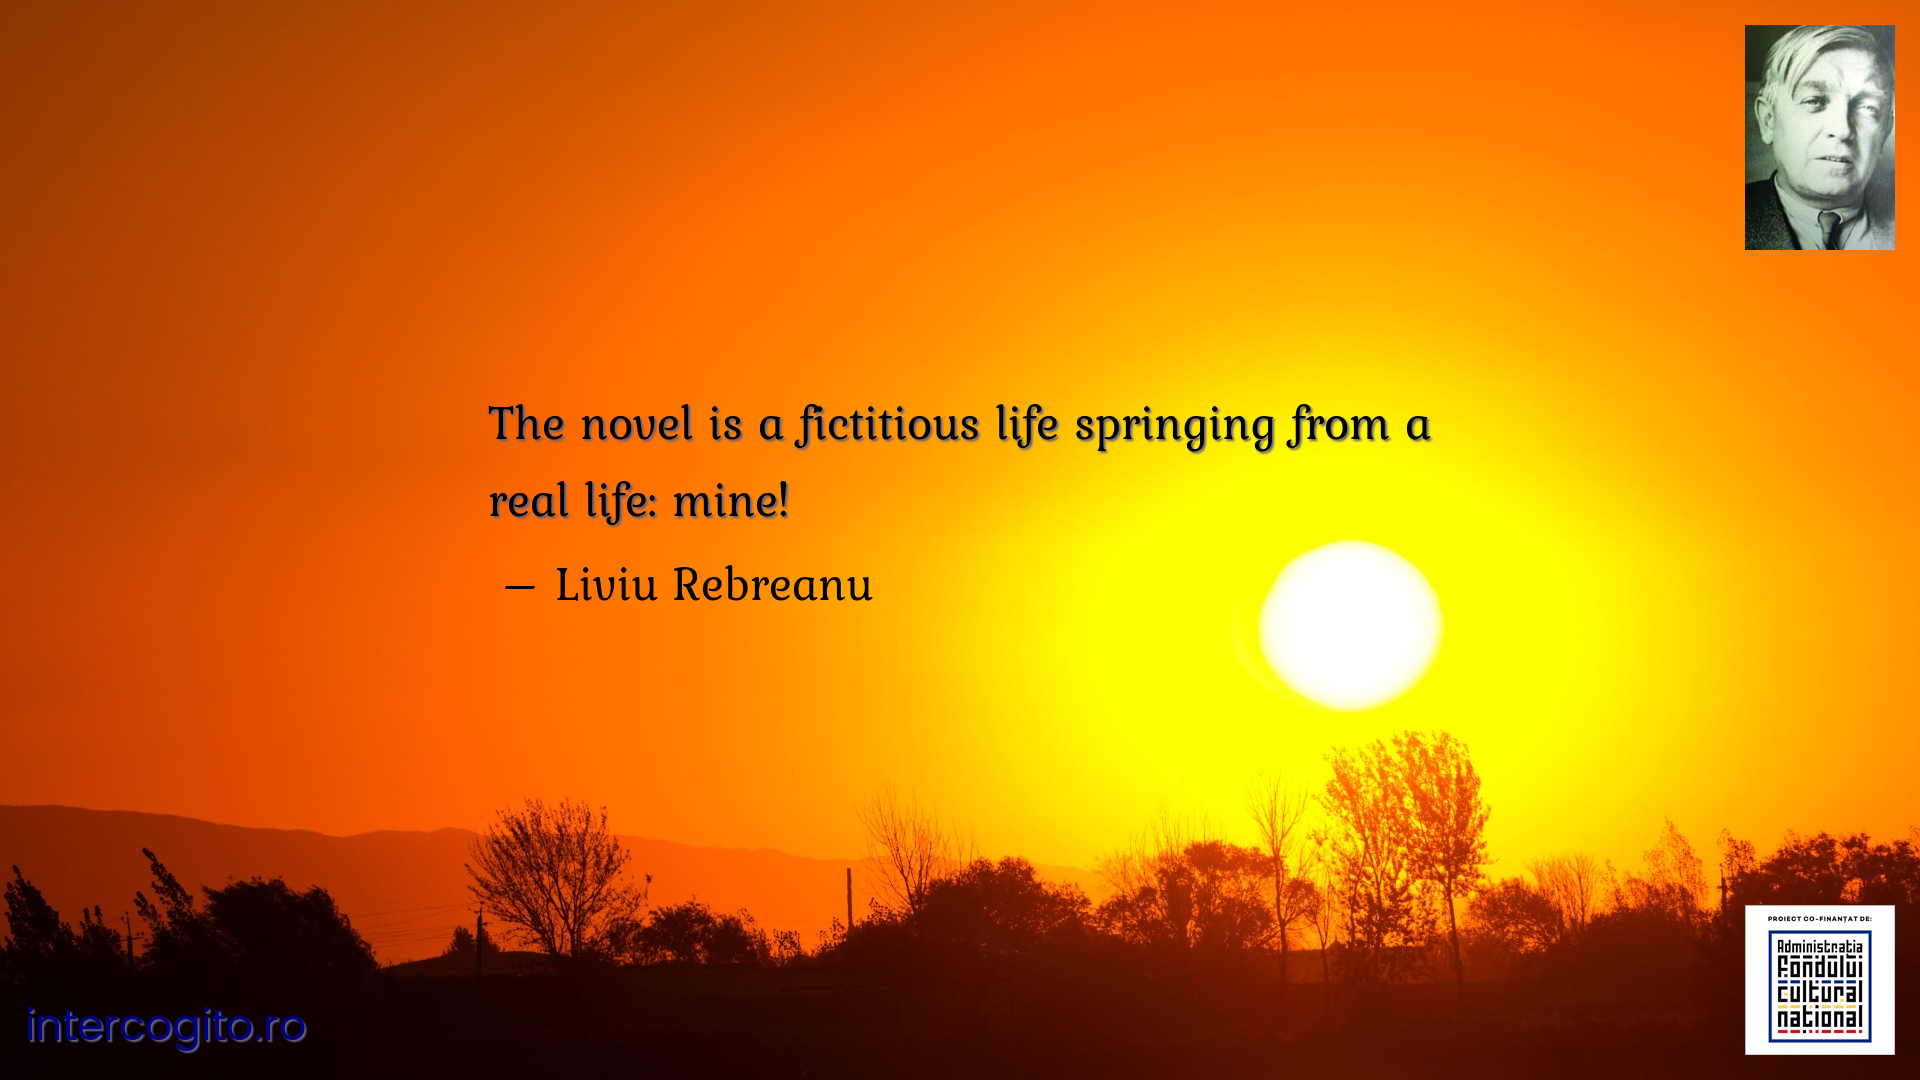 The novel is a fictitious life springing from a real life: mine!